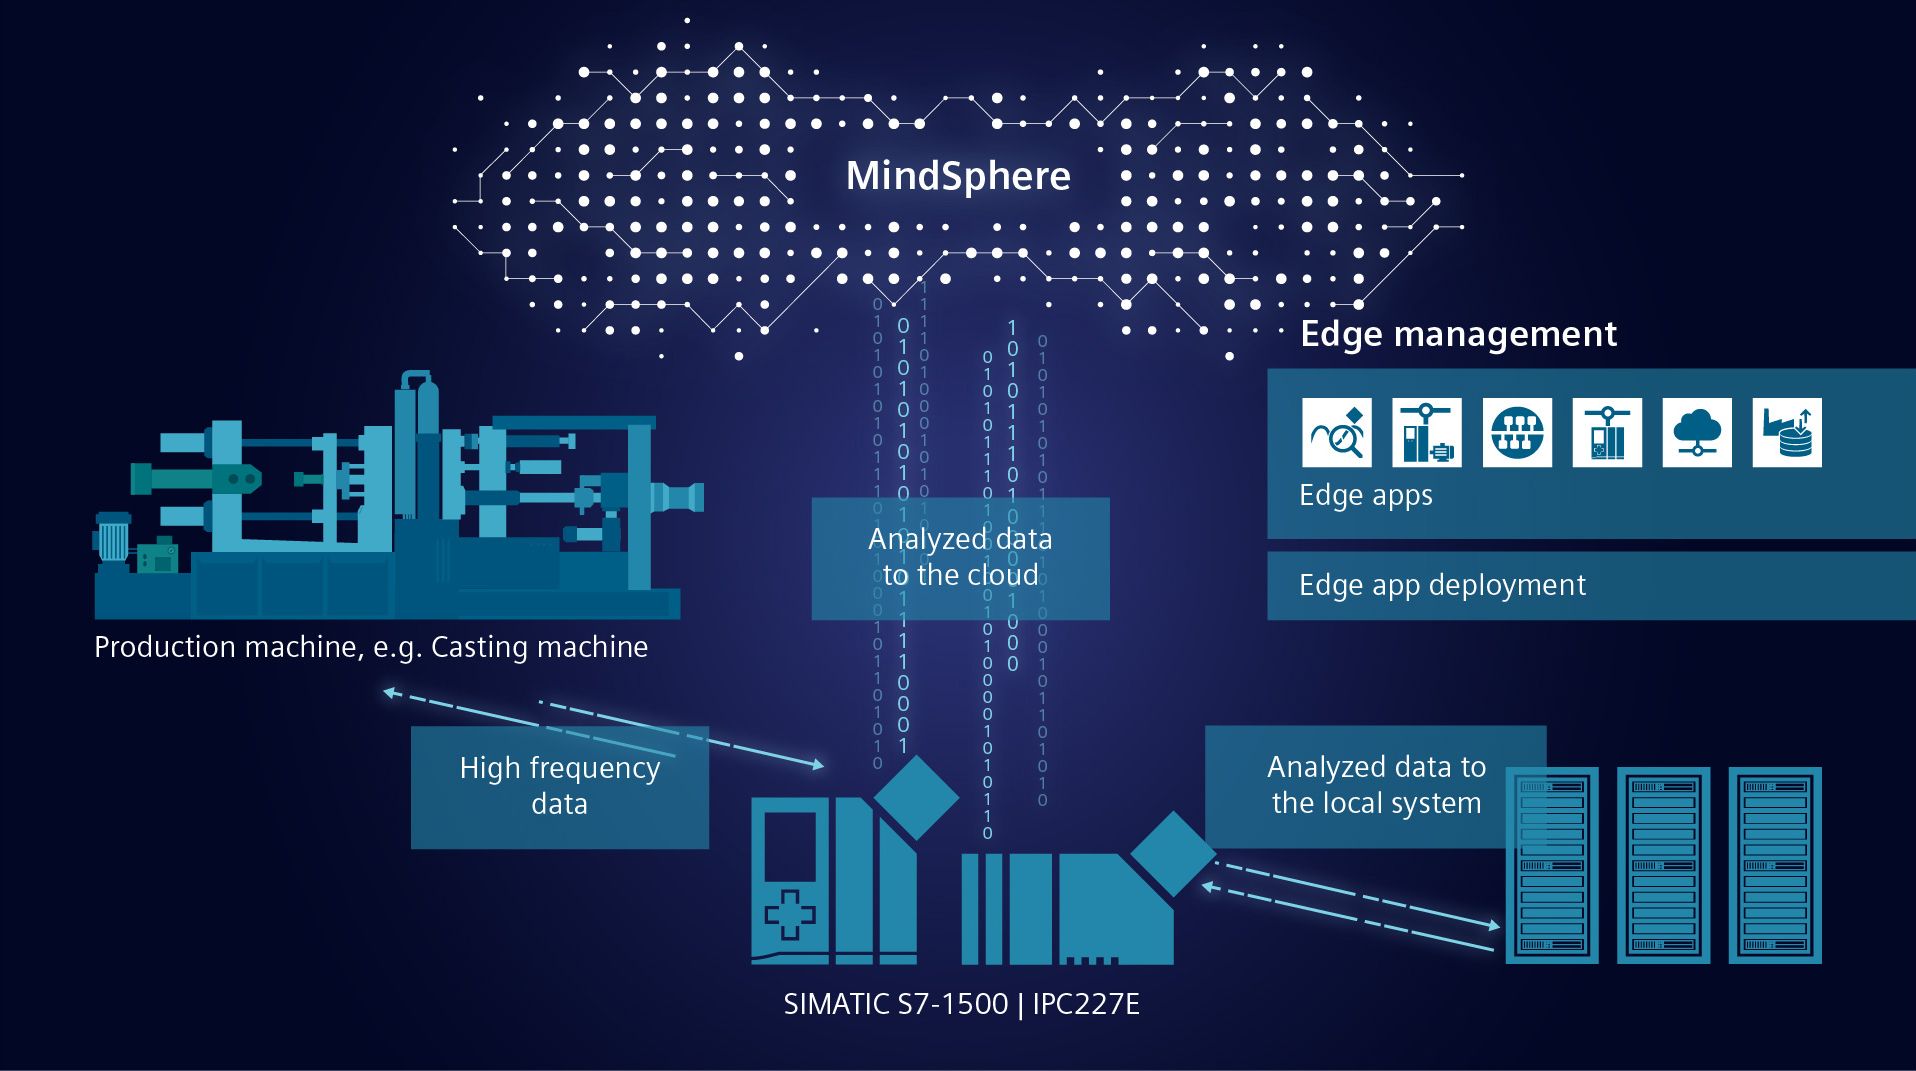 Siemens introduces with Analyze MyDrives Edge its first edge